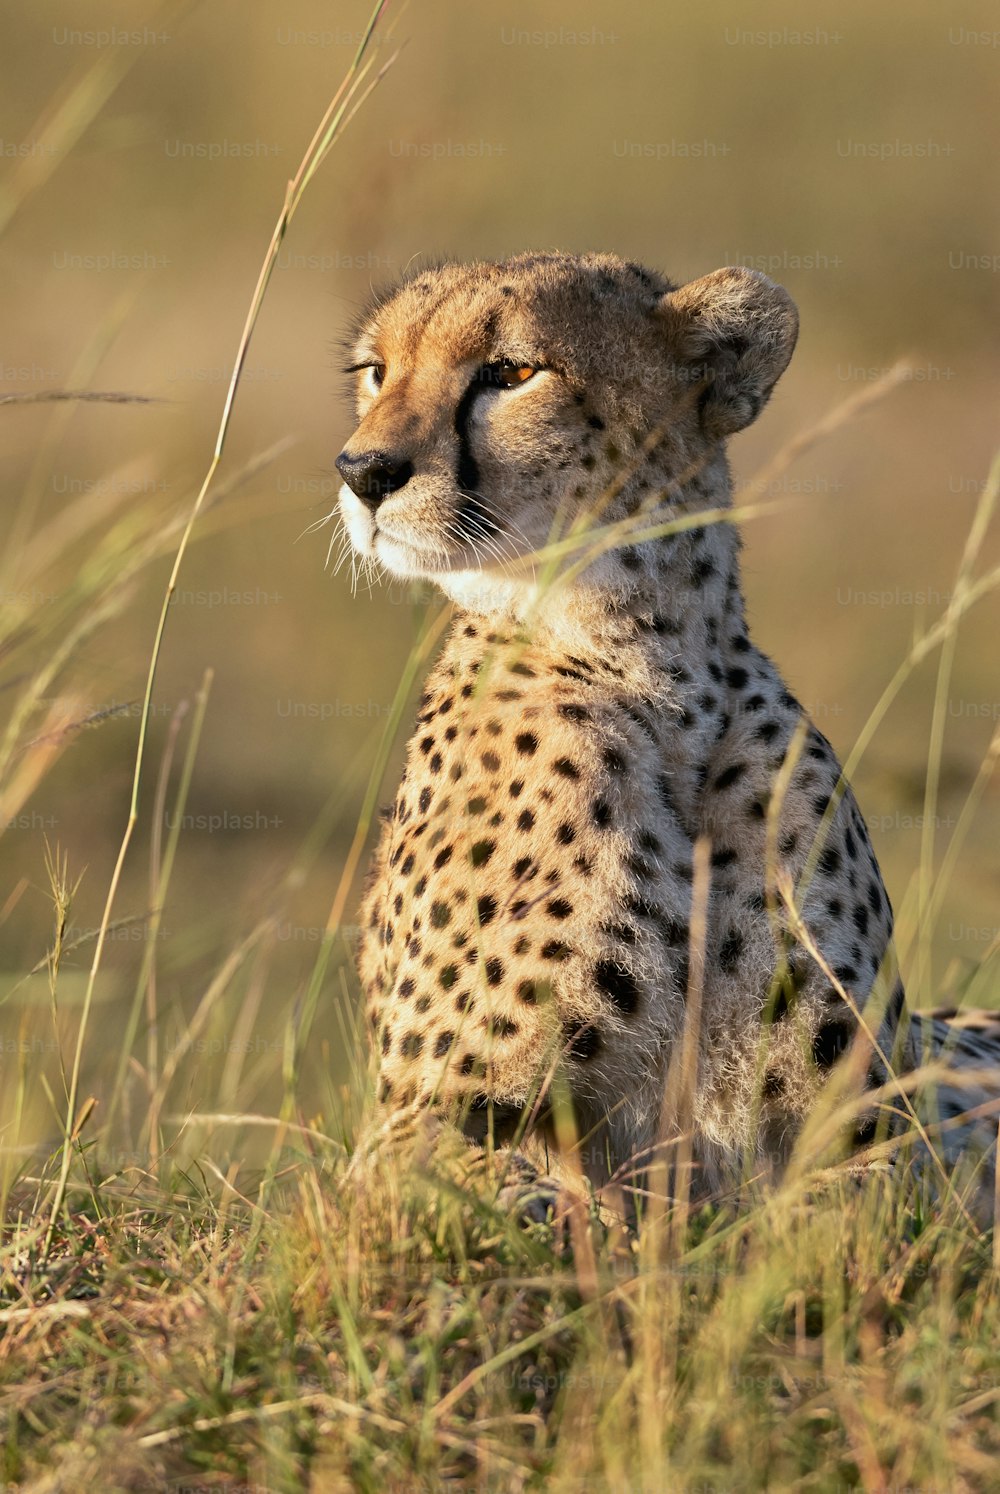 Vertical portrait of a beautiful cheetah looking out towards the horizon stretched out in the grass